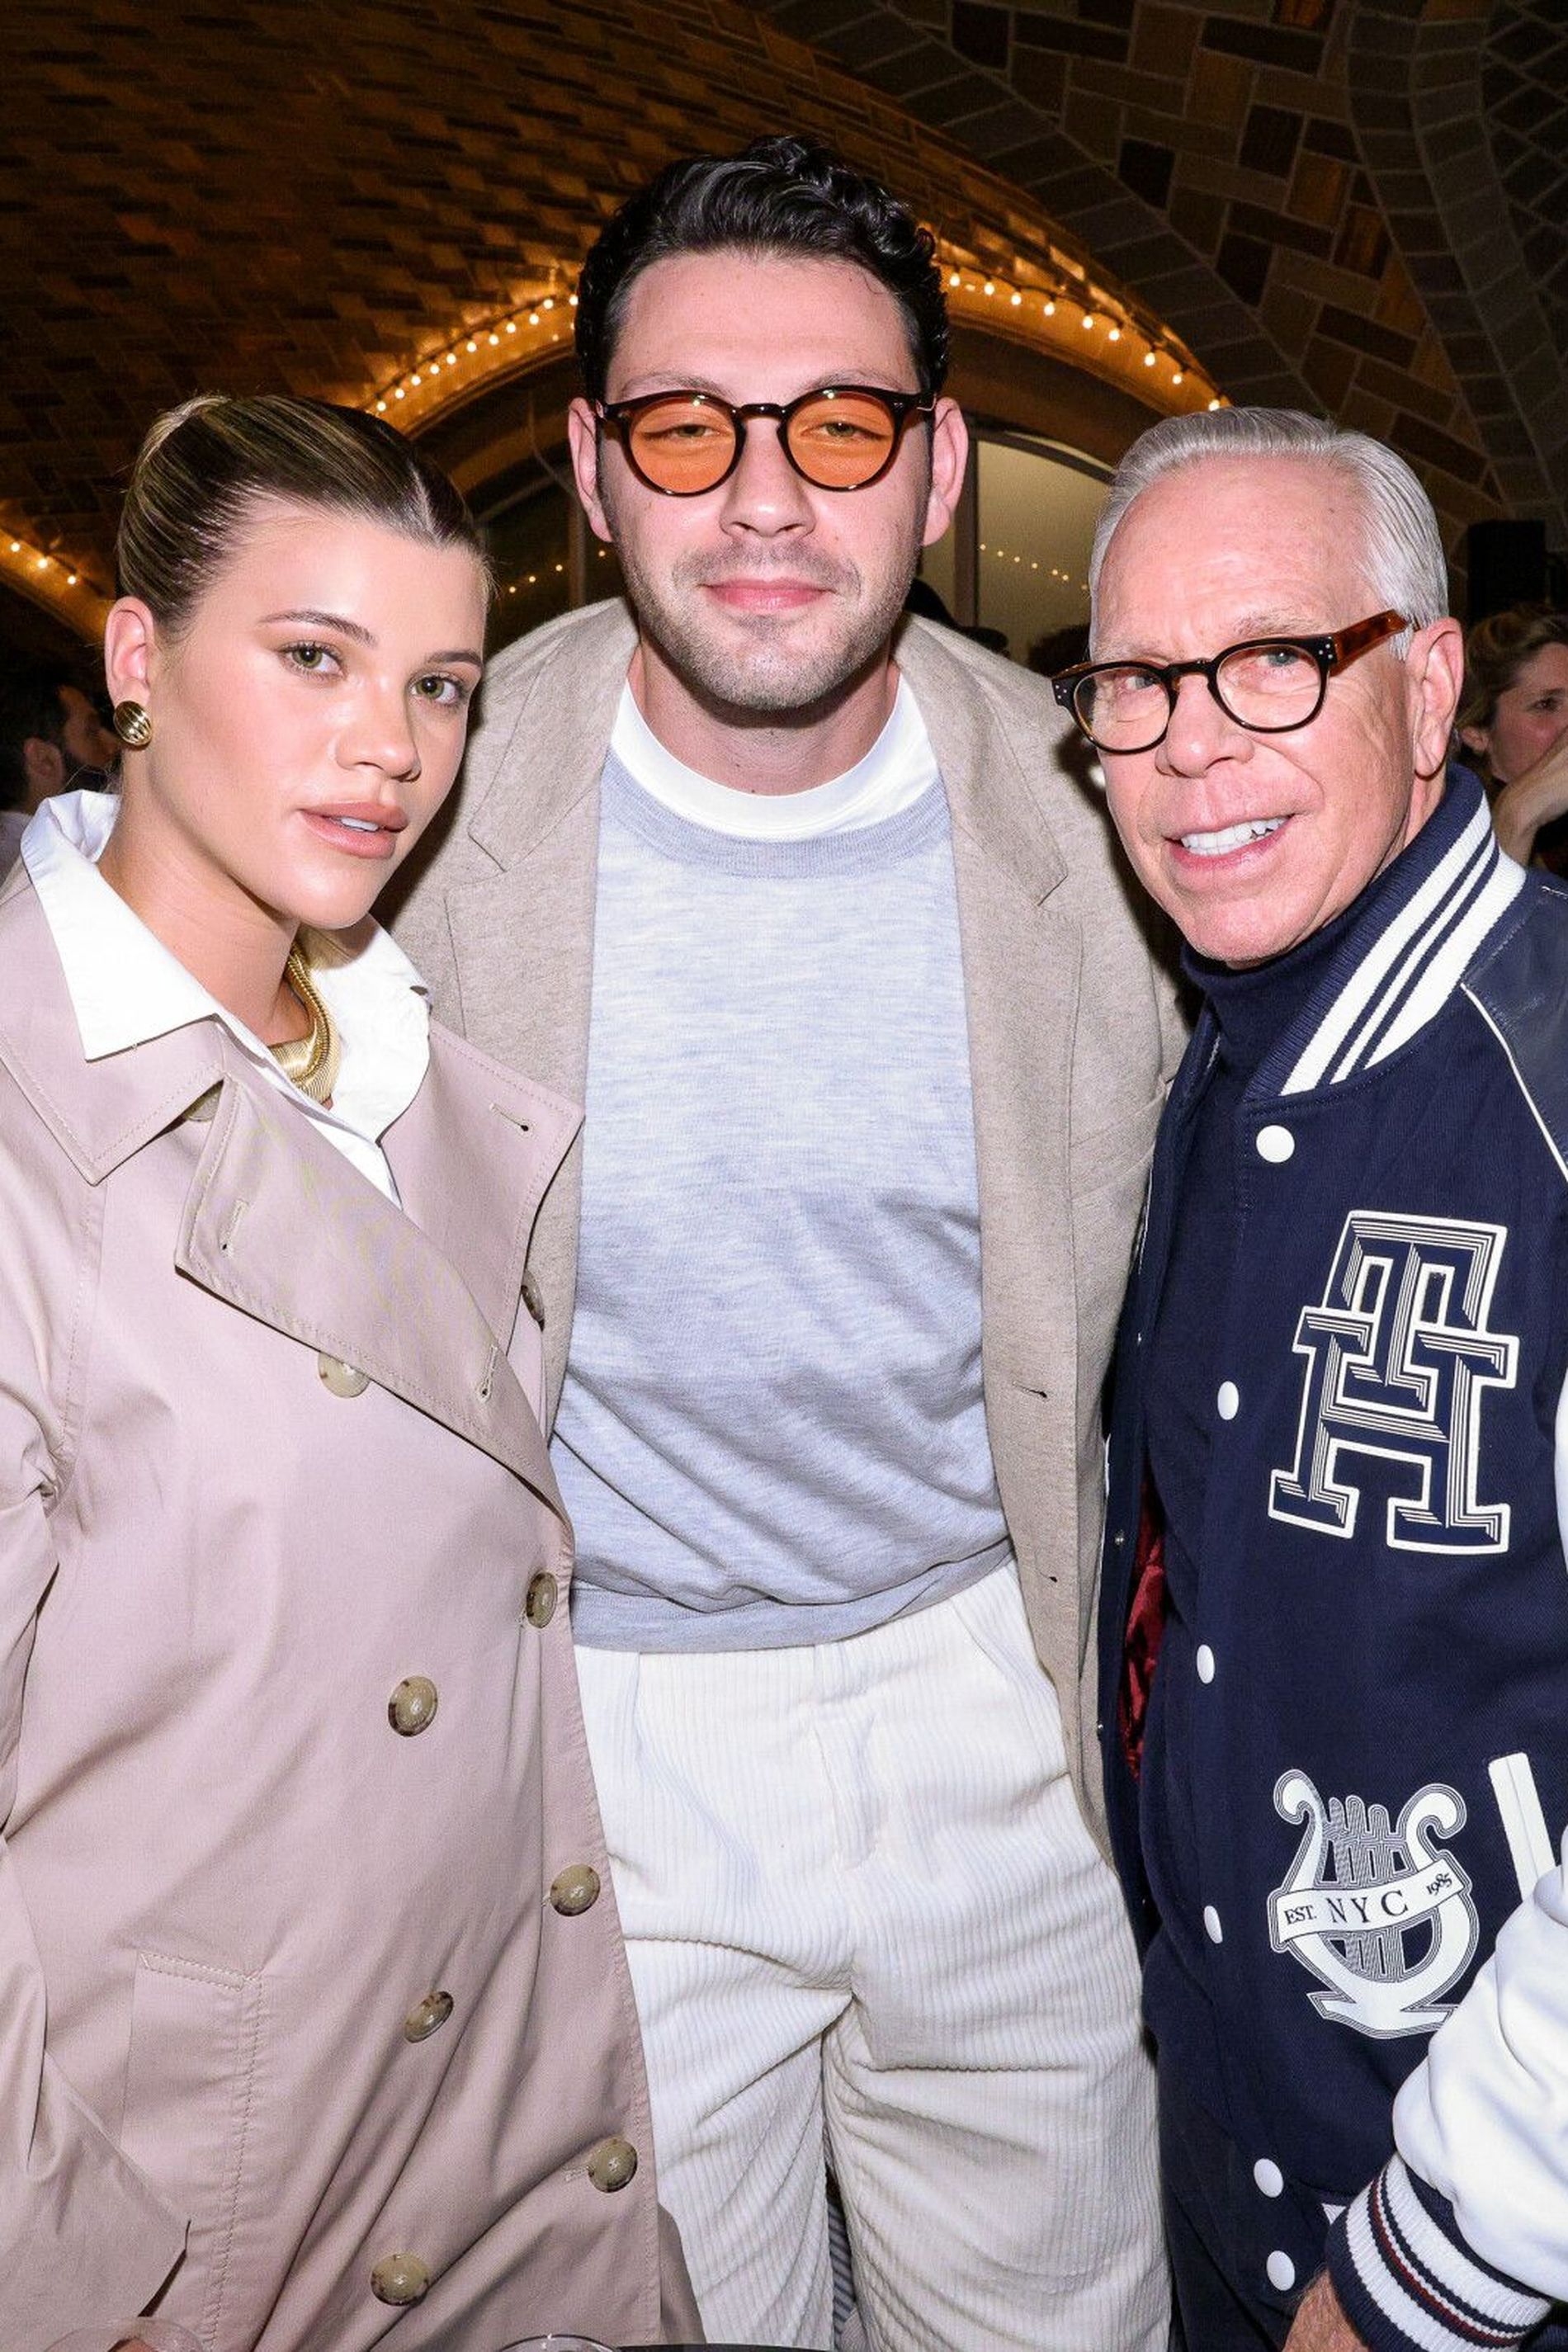 It just felt right to celebrate New York”: Tommy Hilfiger on